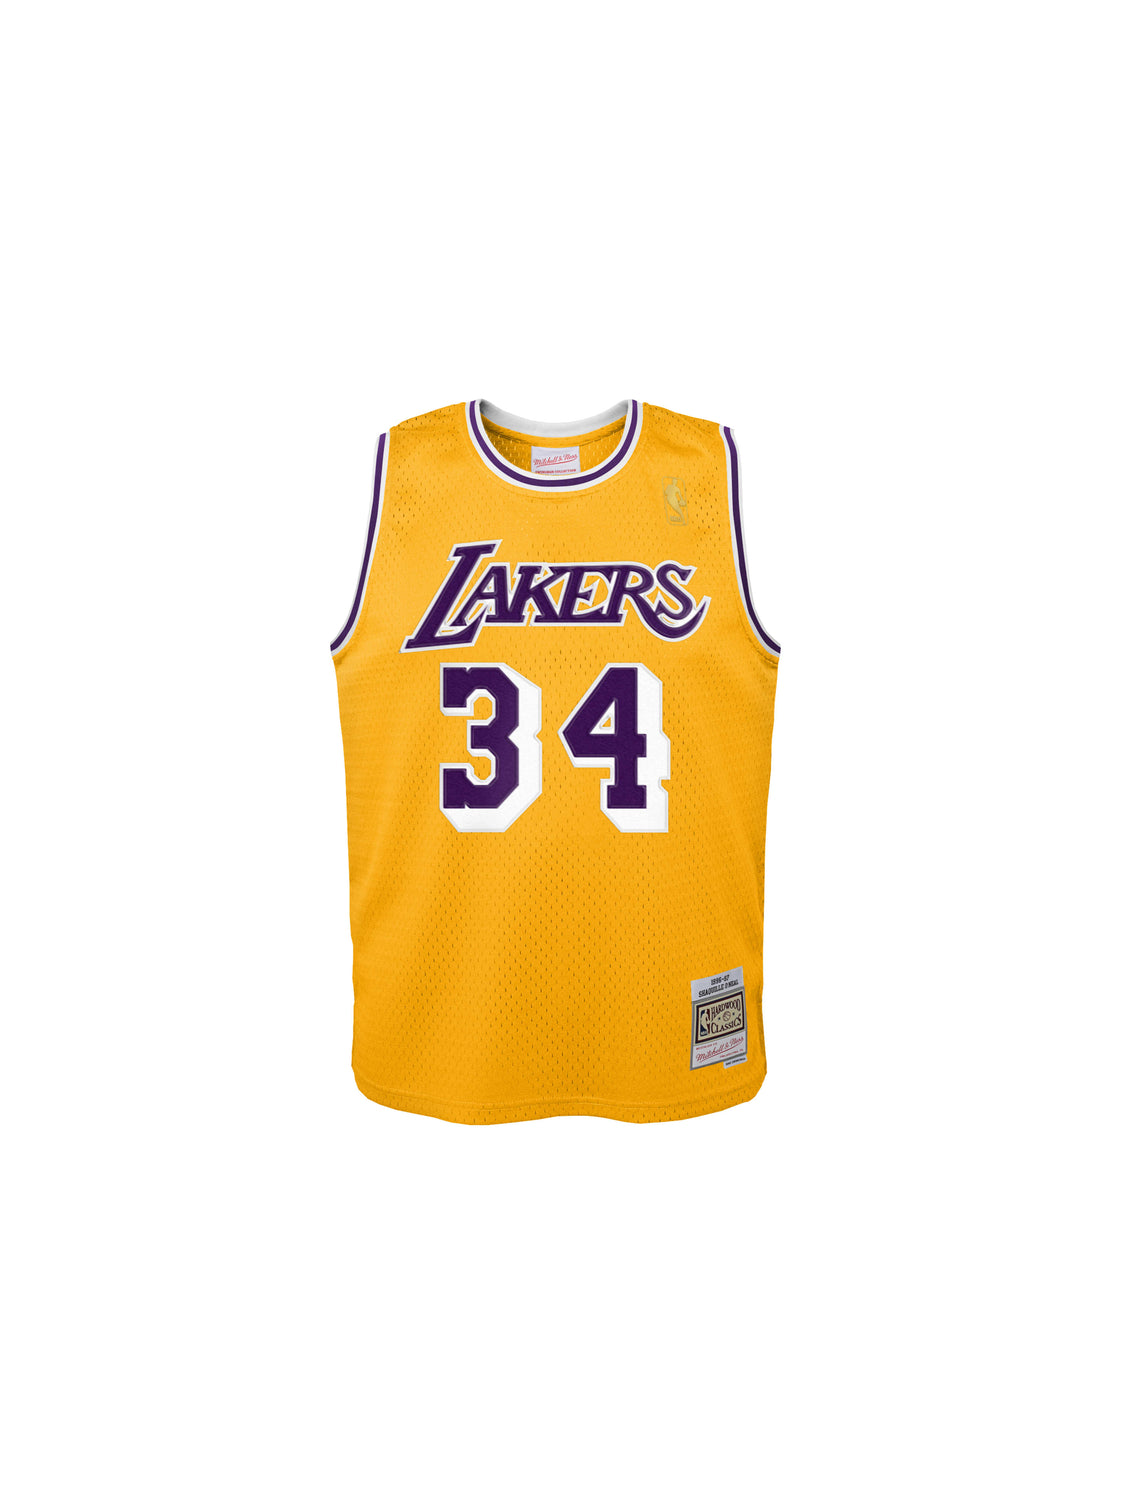 100% Authentic Shaquille O'Neal Mitchell Ness 96 97 Lakers Jersey